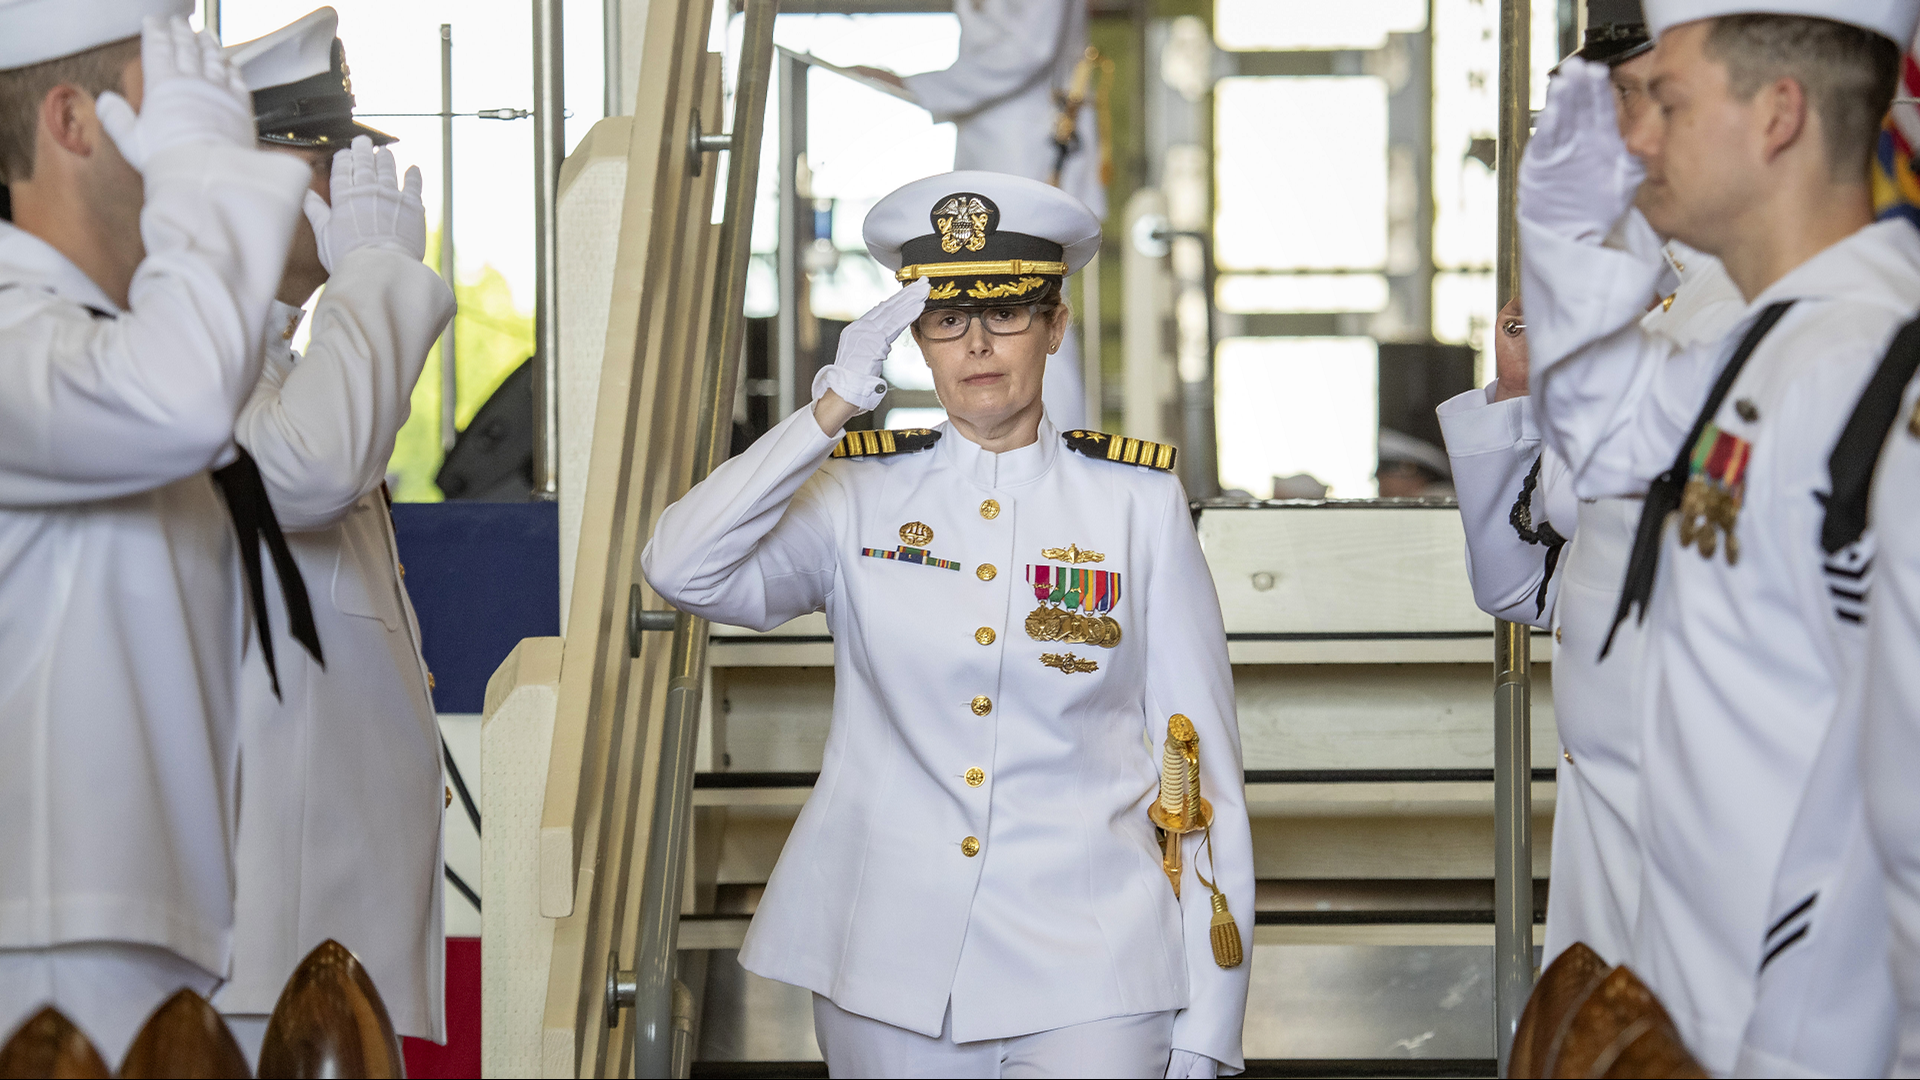 Captain Dianna Wolfson replaced Captain Howard Markle as Commander at the change of command ceremony on June 12. Captain Wolfson is now the first woman to command a Navy shipyard, ever.